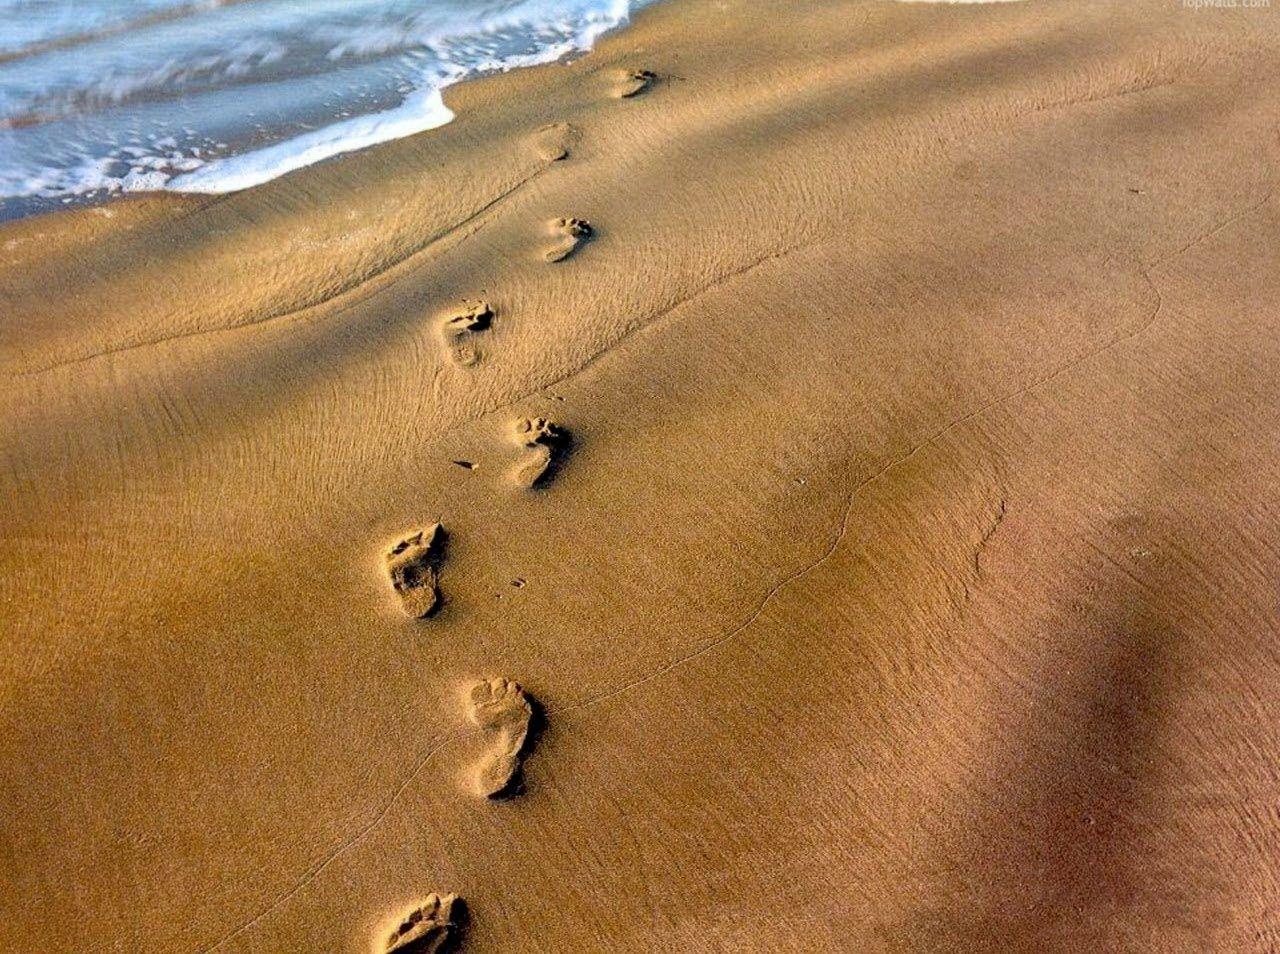 Footprints In The Sand (1080p HD) Performed By Stephen Meara Blount